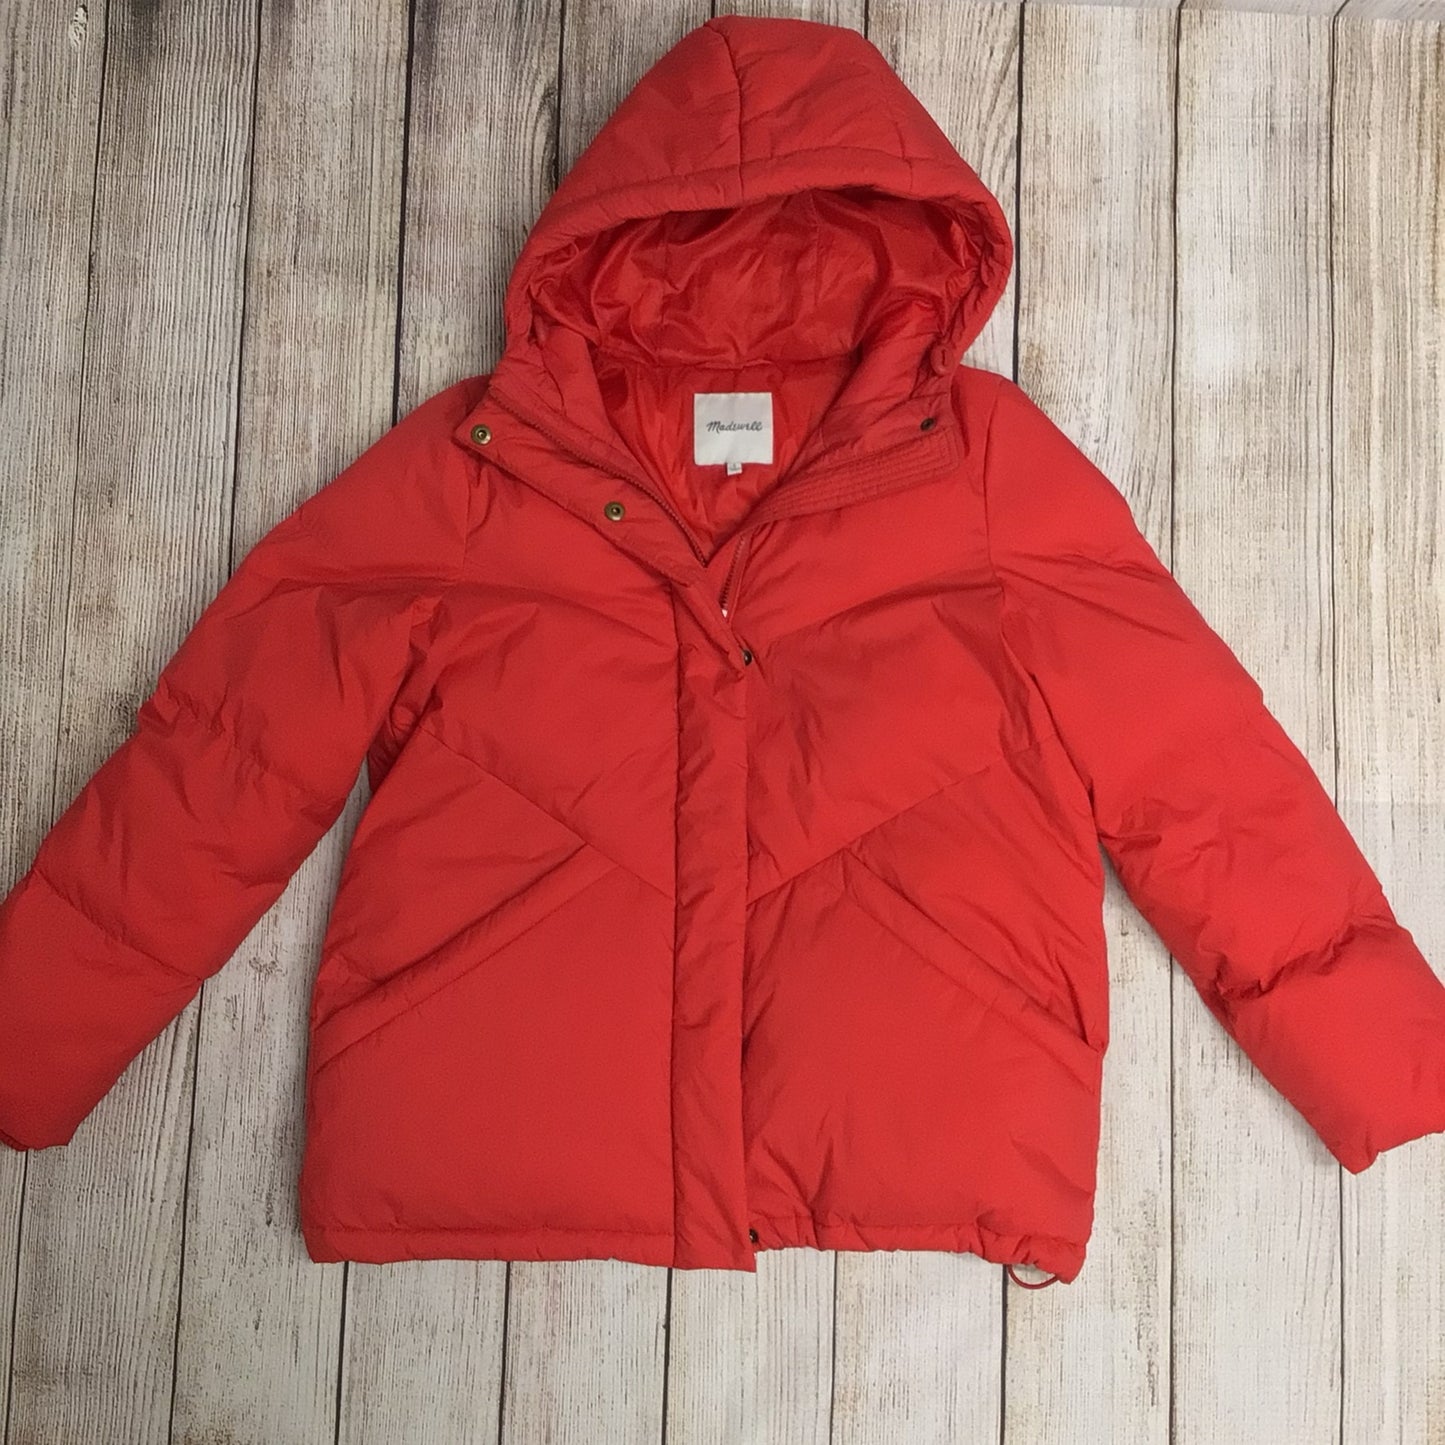 Madewell Primaloft Red Puffer Jacket Size S